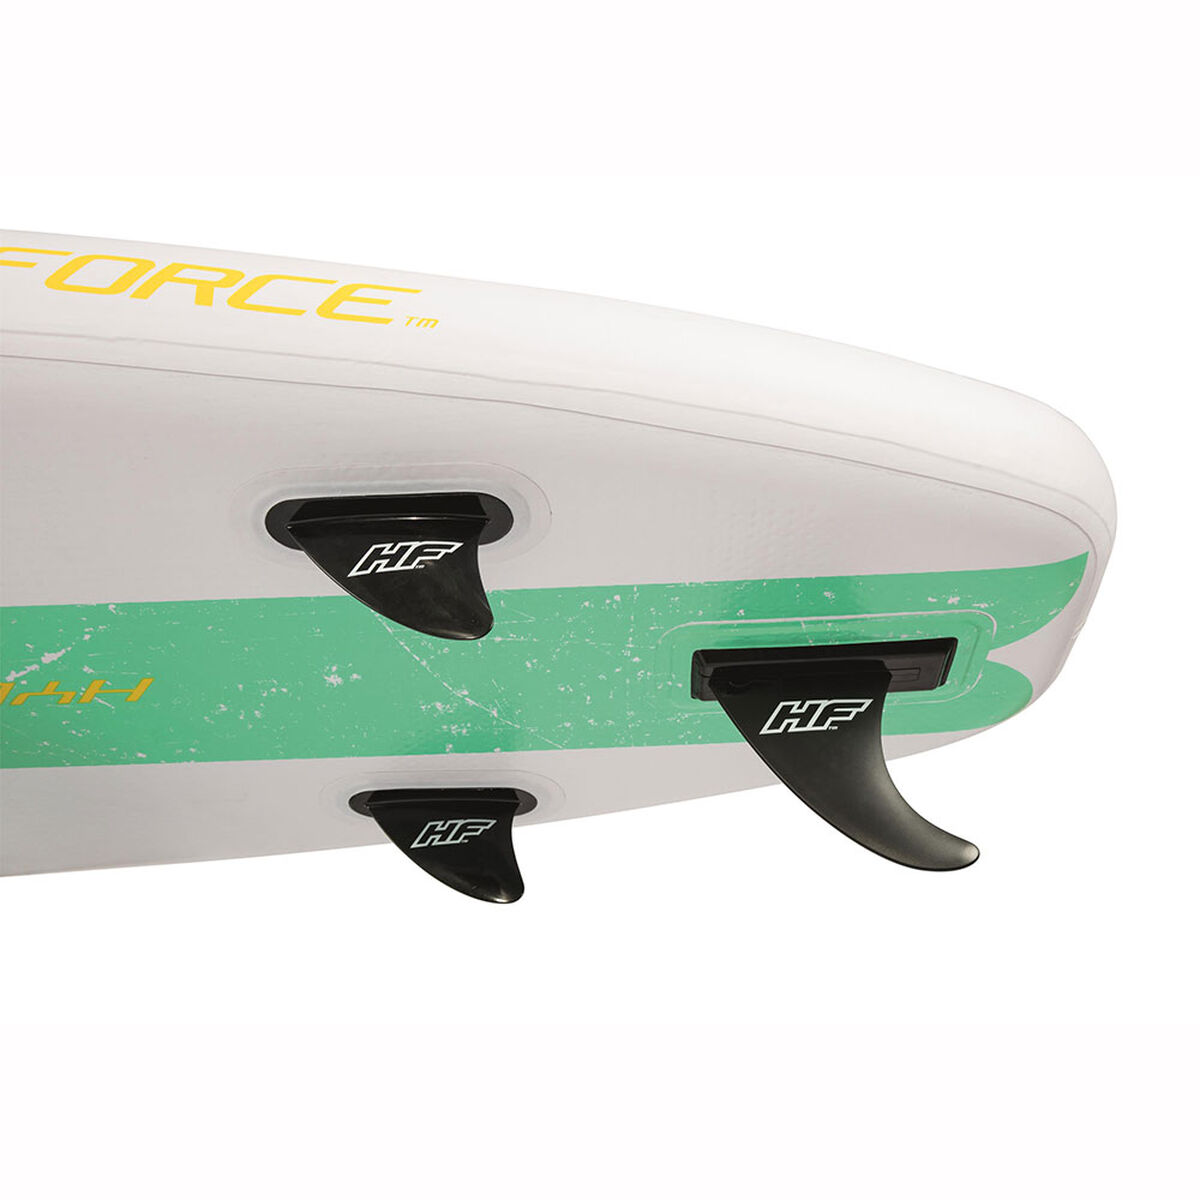 Stand up Paddle Bestway Freesoul Hydroforce